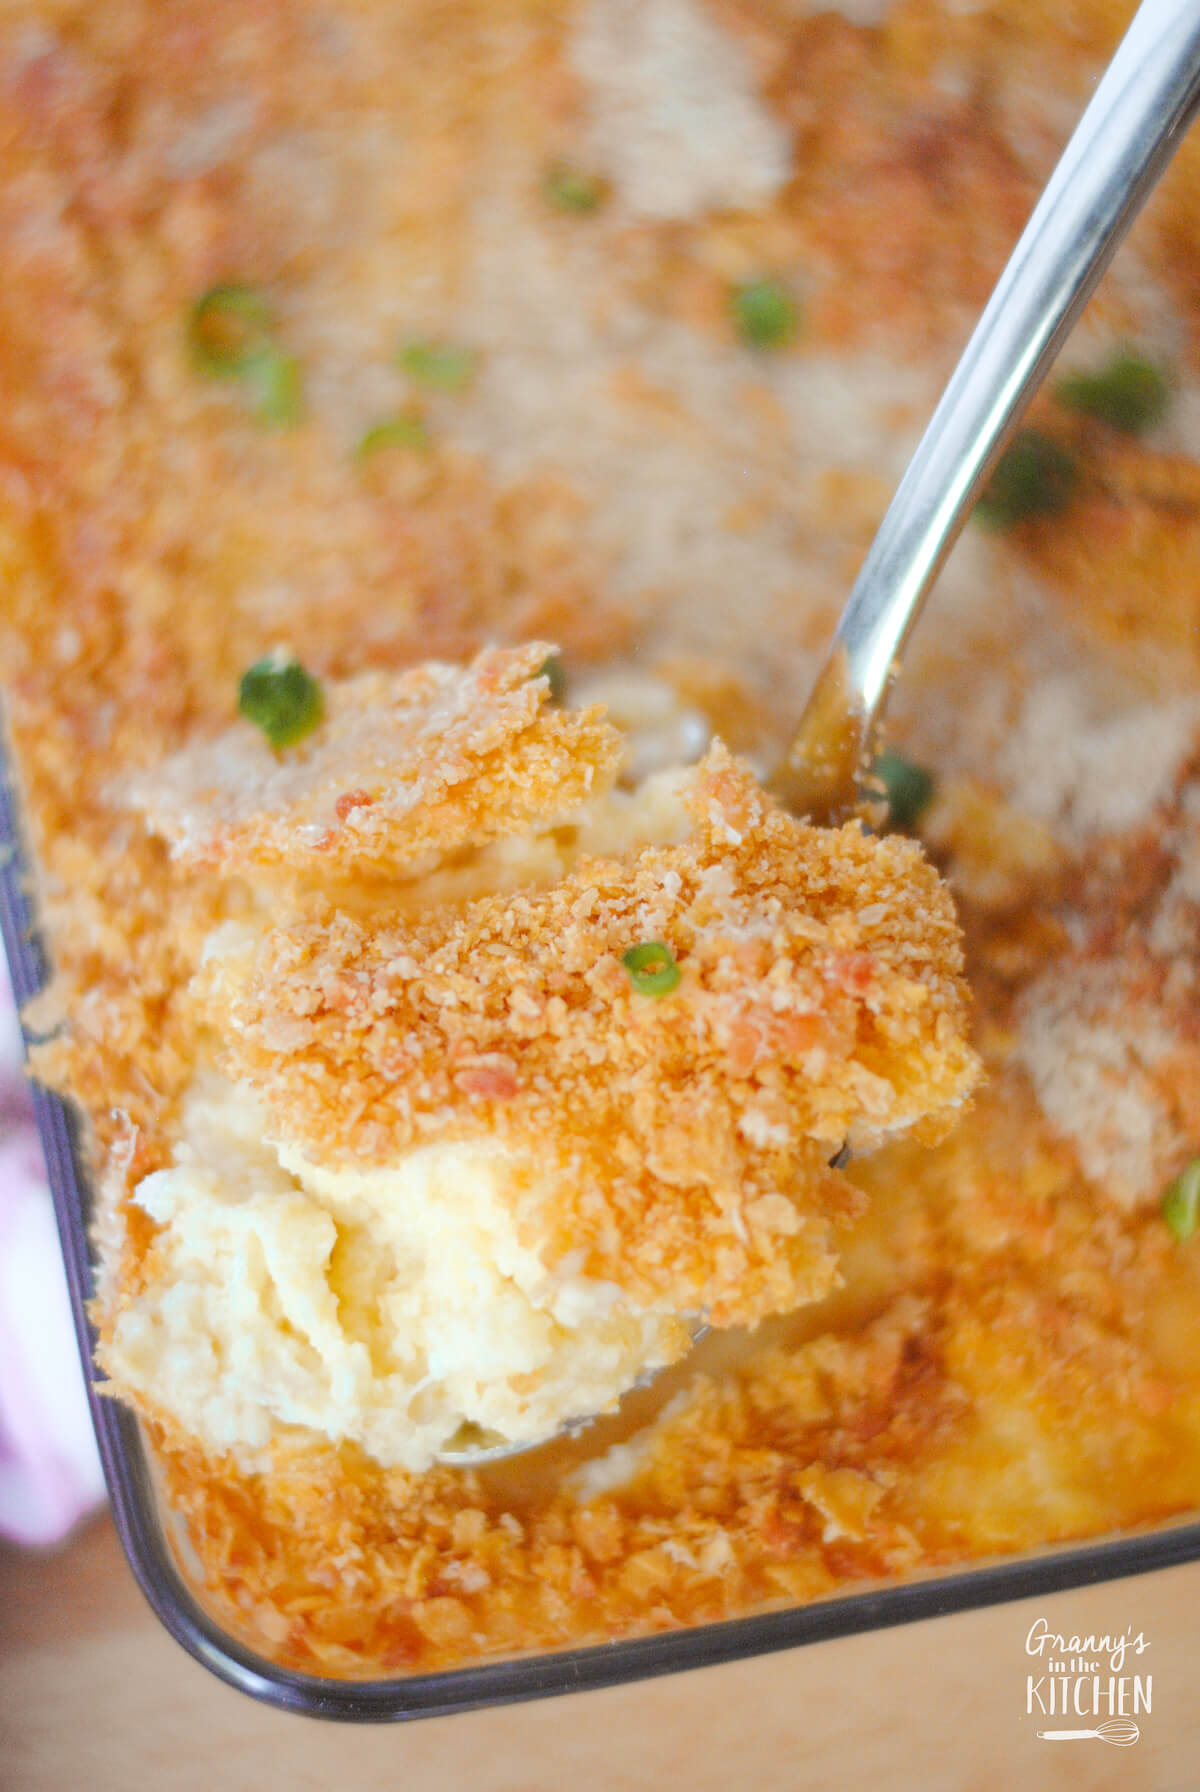 scooping a serving of baked mashed potatoes with a crispy topping.